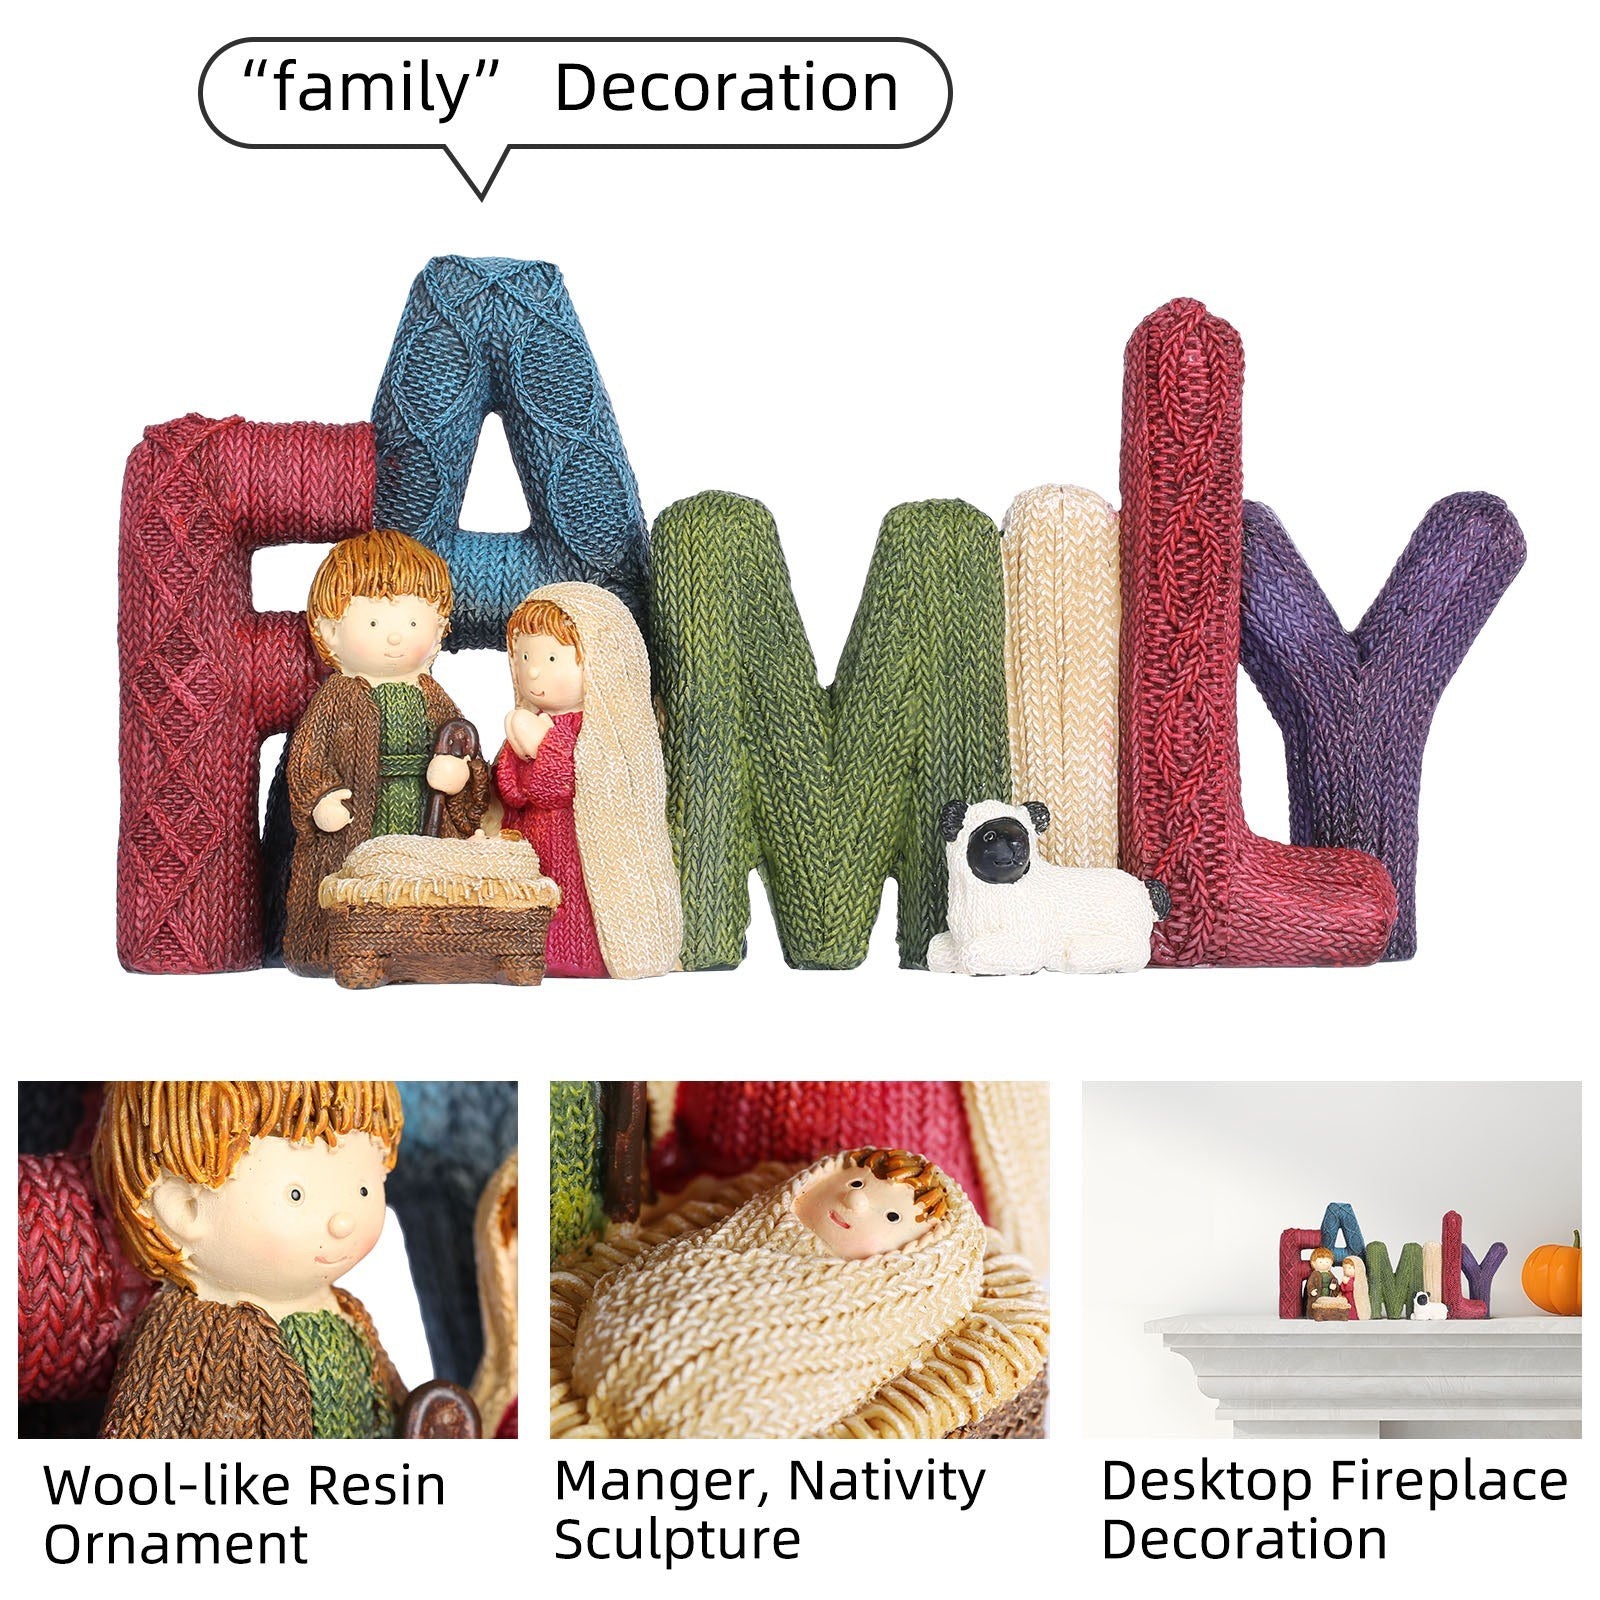 Get the thoughtful gifts to show your love & appreciation for your family